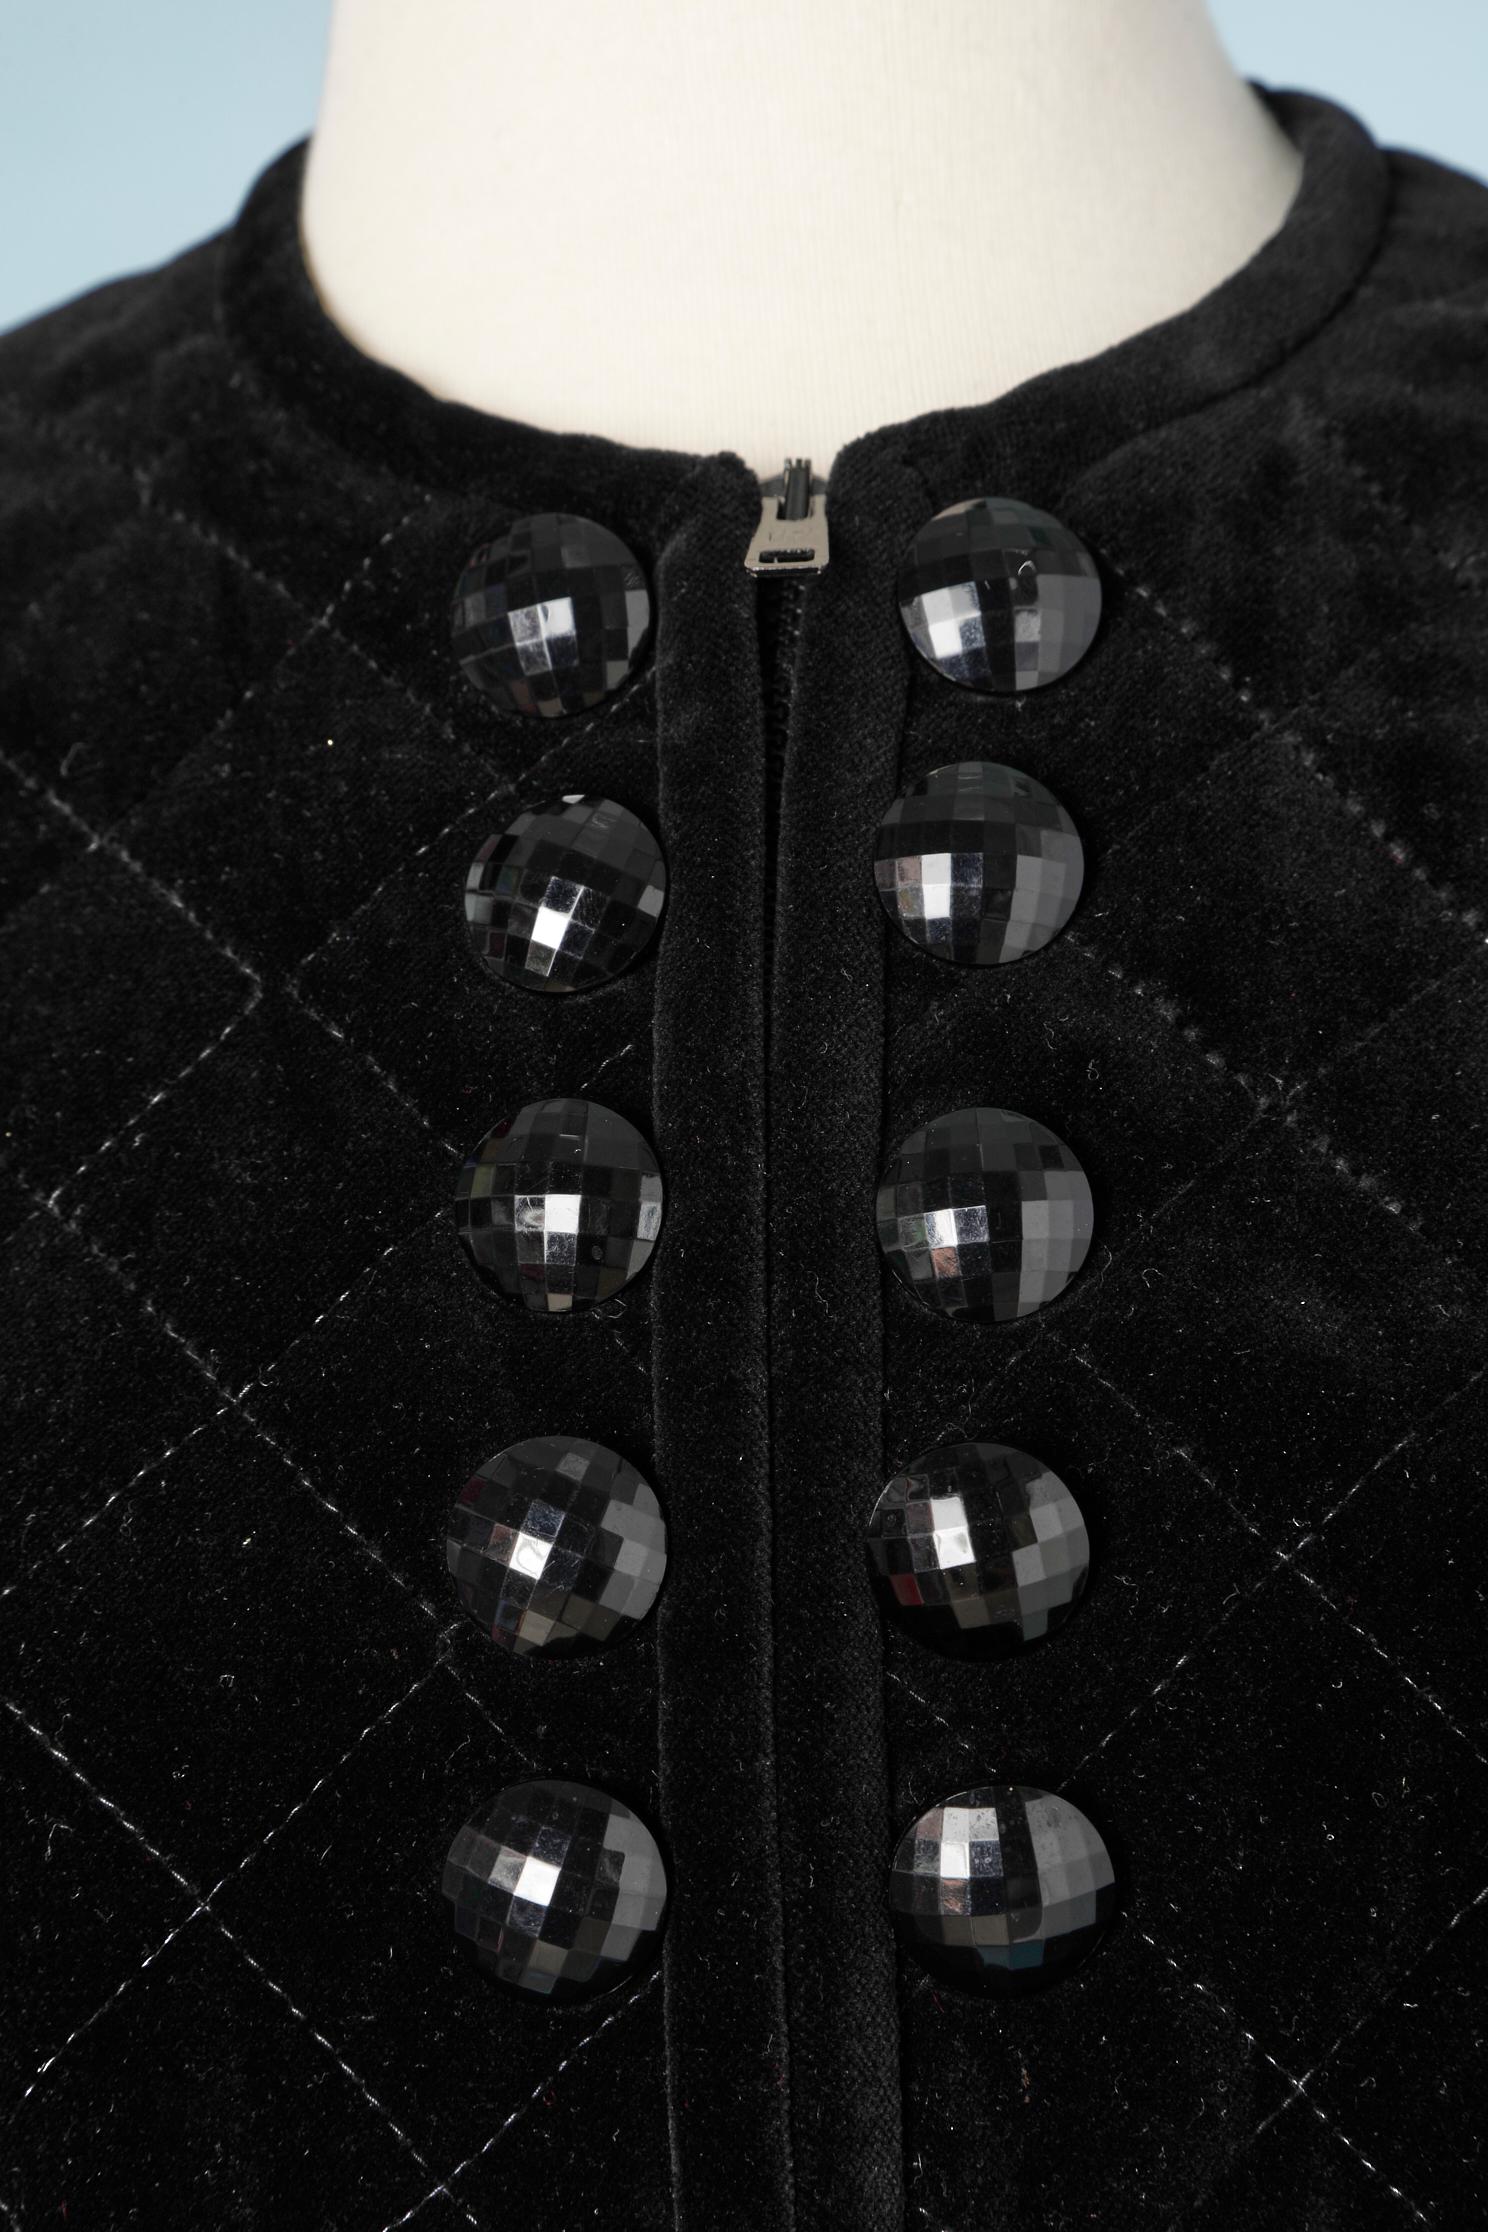 Black quilted velvet jacket with decorative buttons and zip in the middle front.
SIZE 40 (Fr) L (Us)
